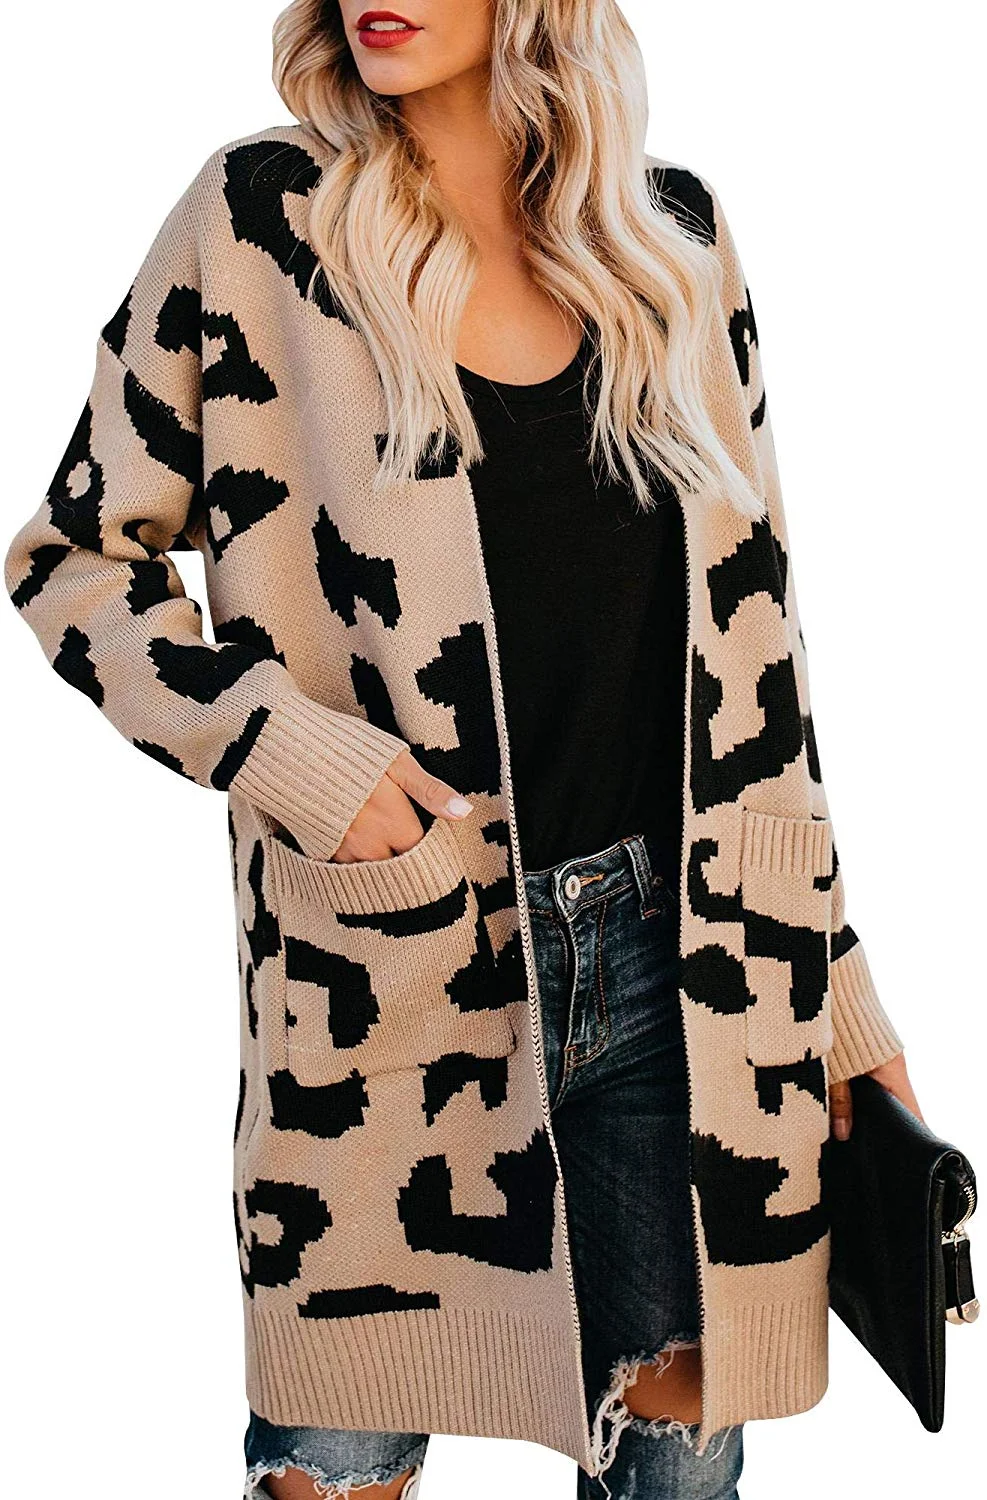 Womens Leopard Print Cardigan Sweater Open Front Long Sleeve Loose Knit Coat with Pockets